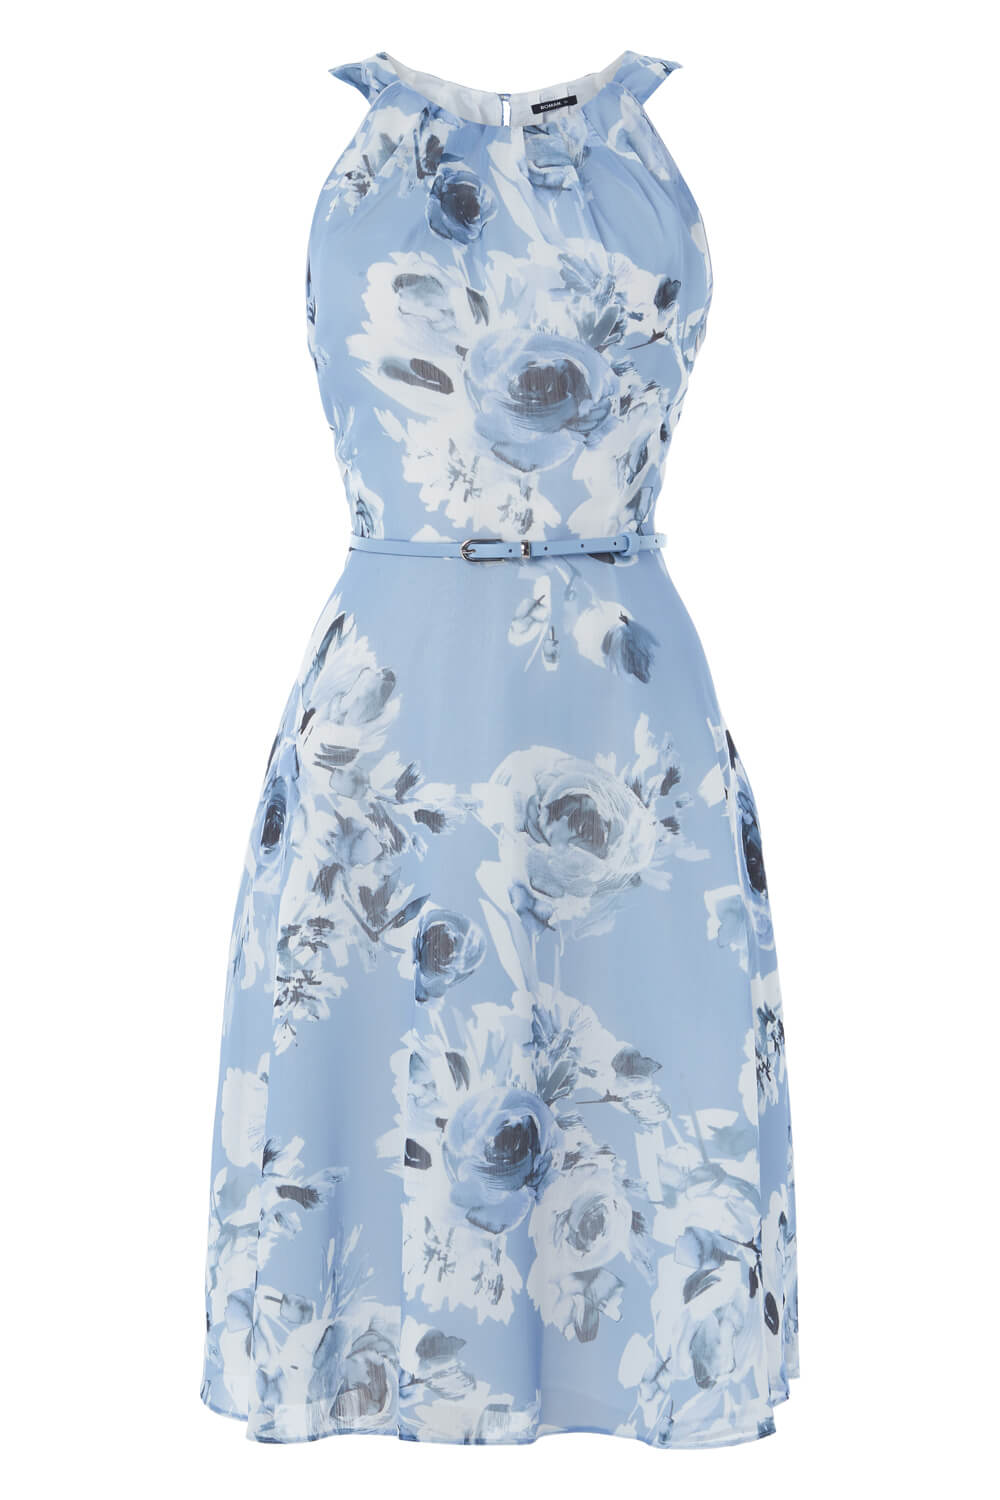 Blue Floral Fit and Flare Dress with Belt, Image 4 of 4